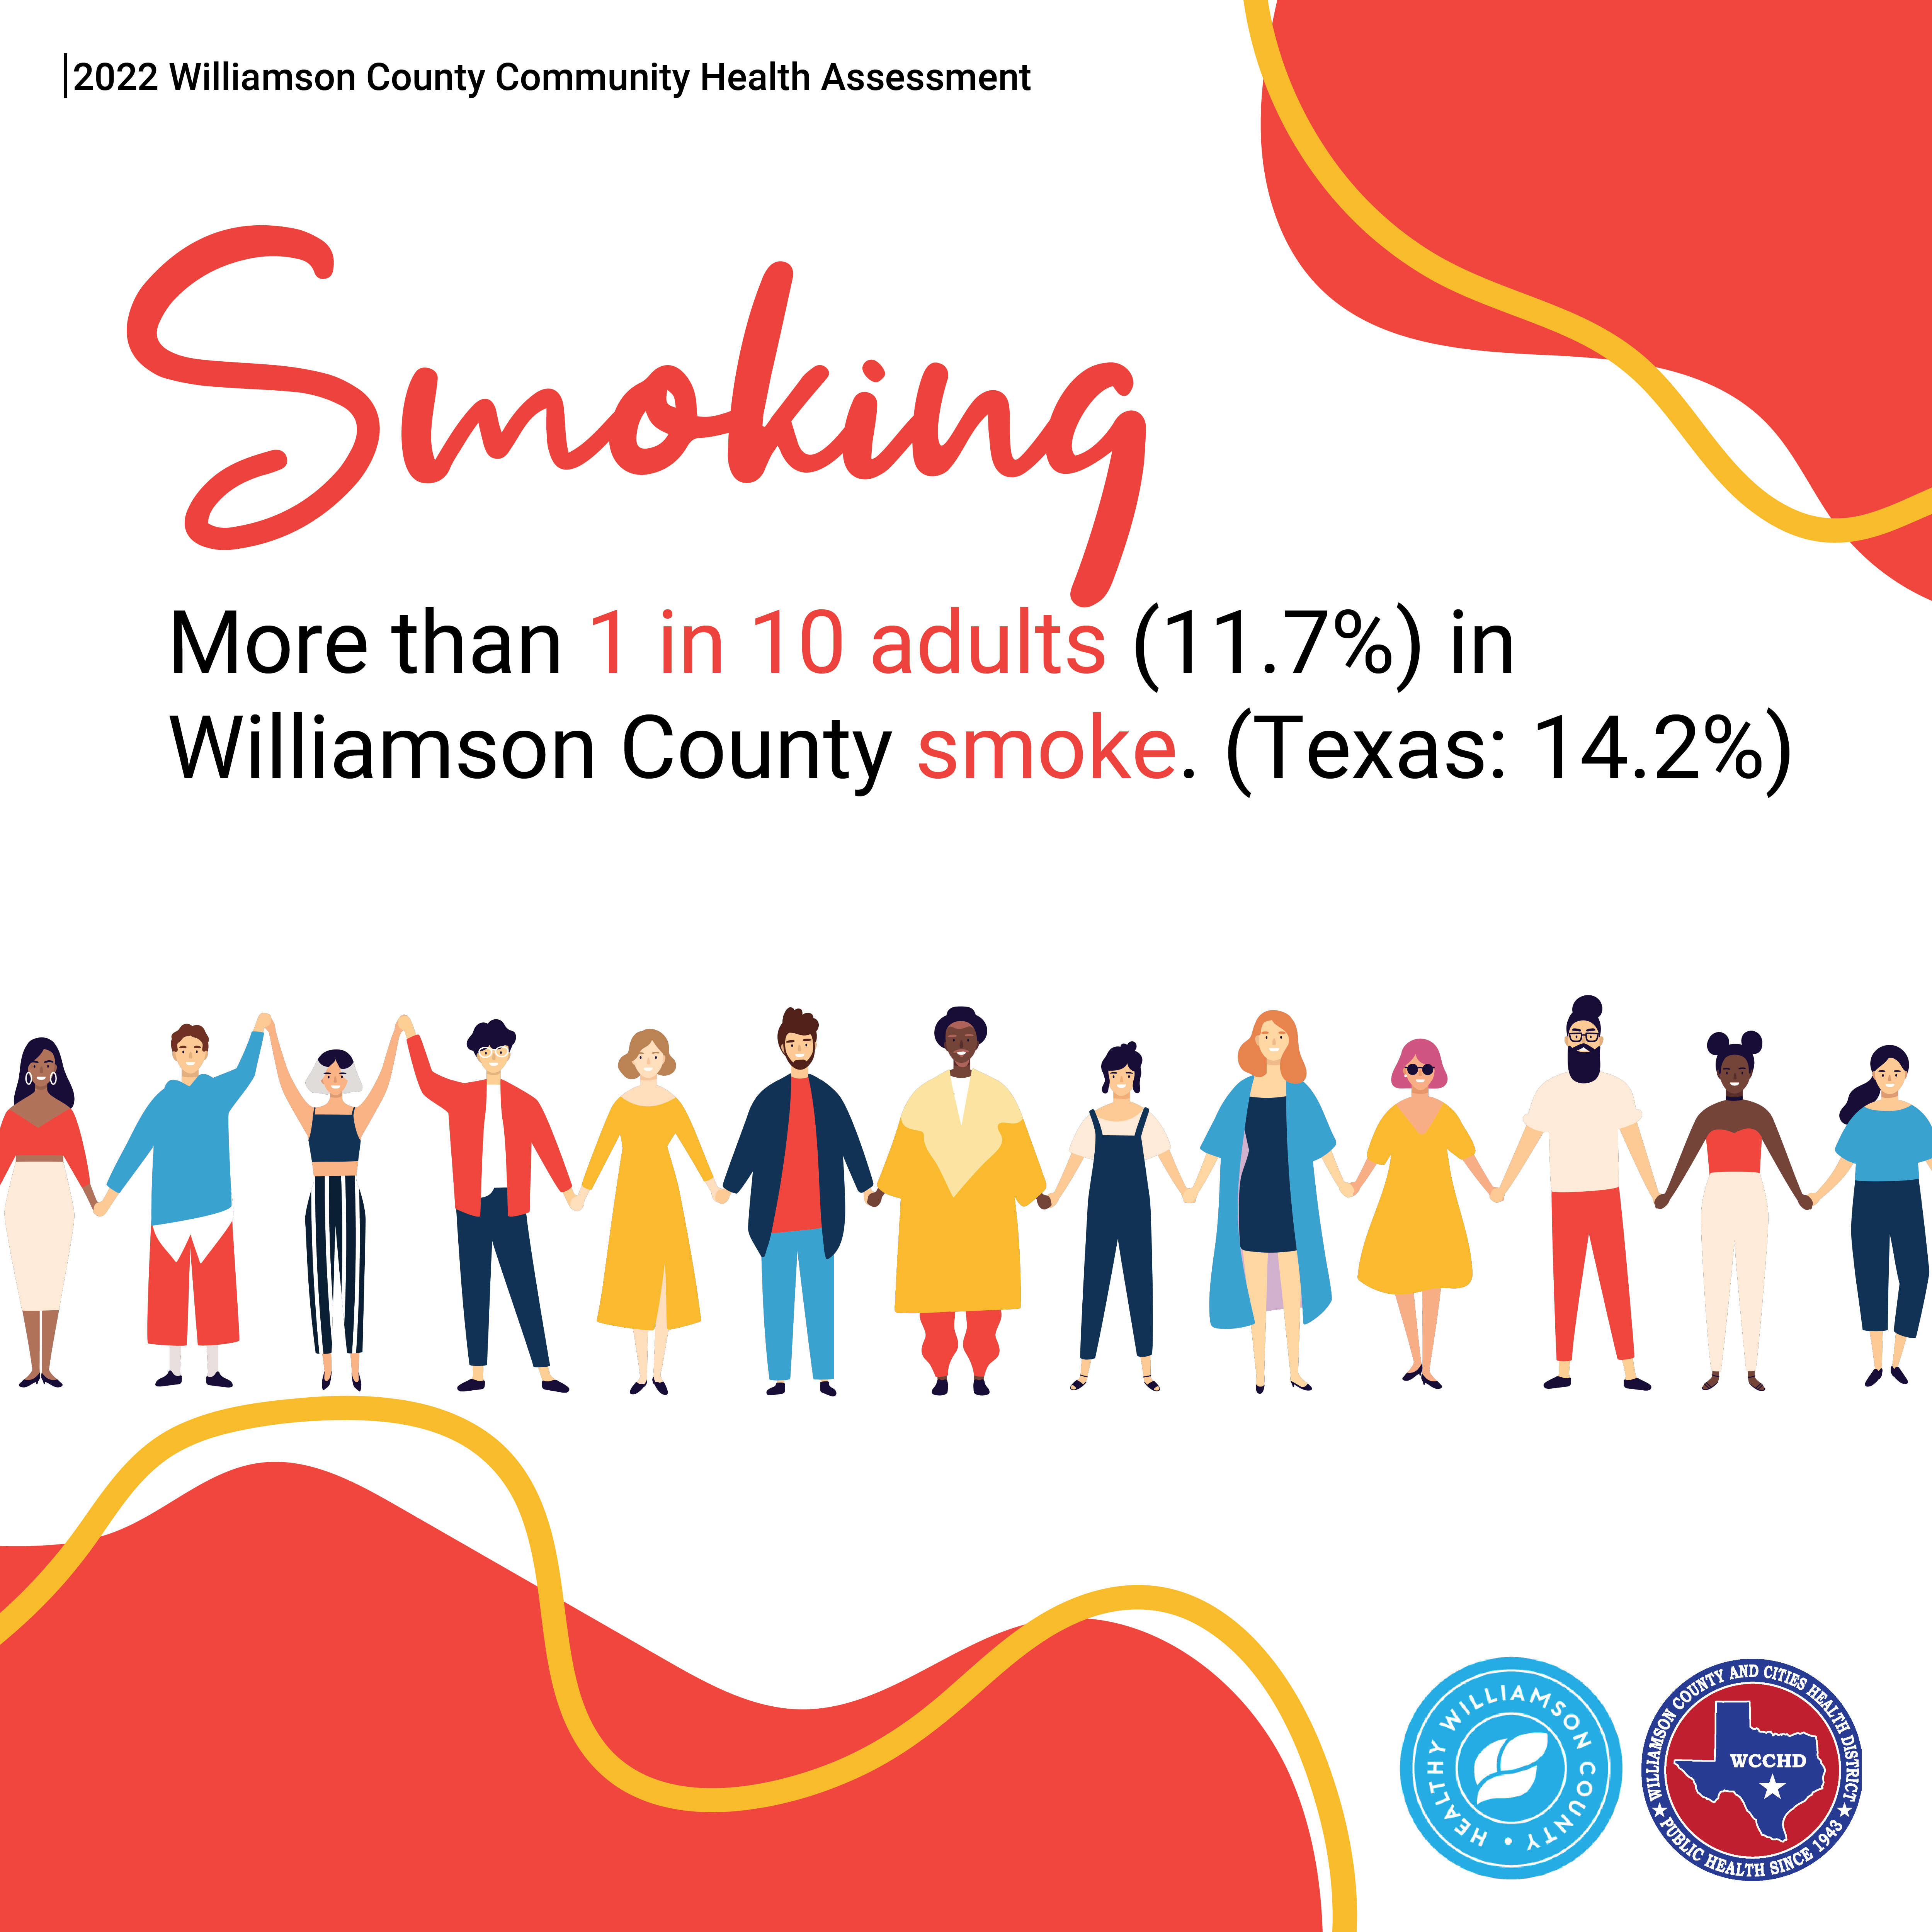 2022 Williamson County Community Health Assessment. Smoking. More than 1 in 10 adults (11.7%) in Williamson County smoke. (Texas: 14.2%). Below text, a line of illustrated people holding hands and smiling. Blobs and squiggly lines in bottom left and top right corners. At the bottom, logos of Healthy Williamson County and Williamson County and Cities Health District.